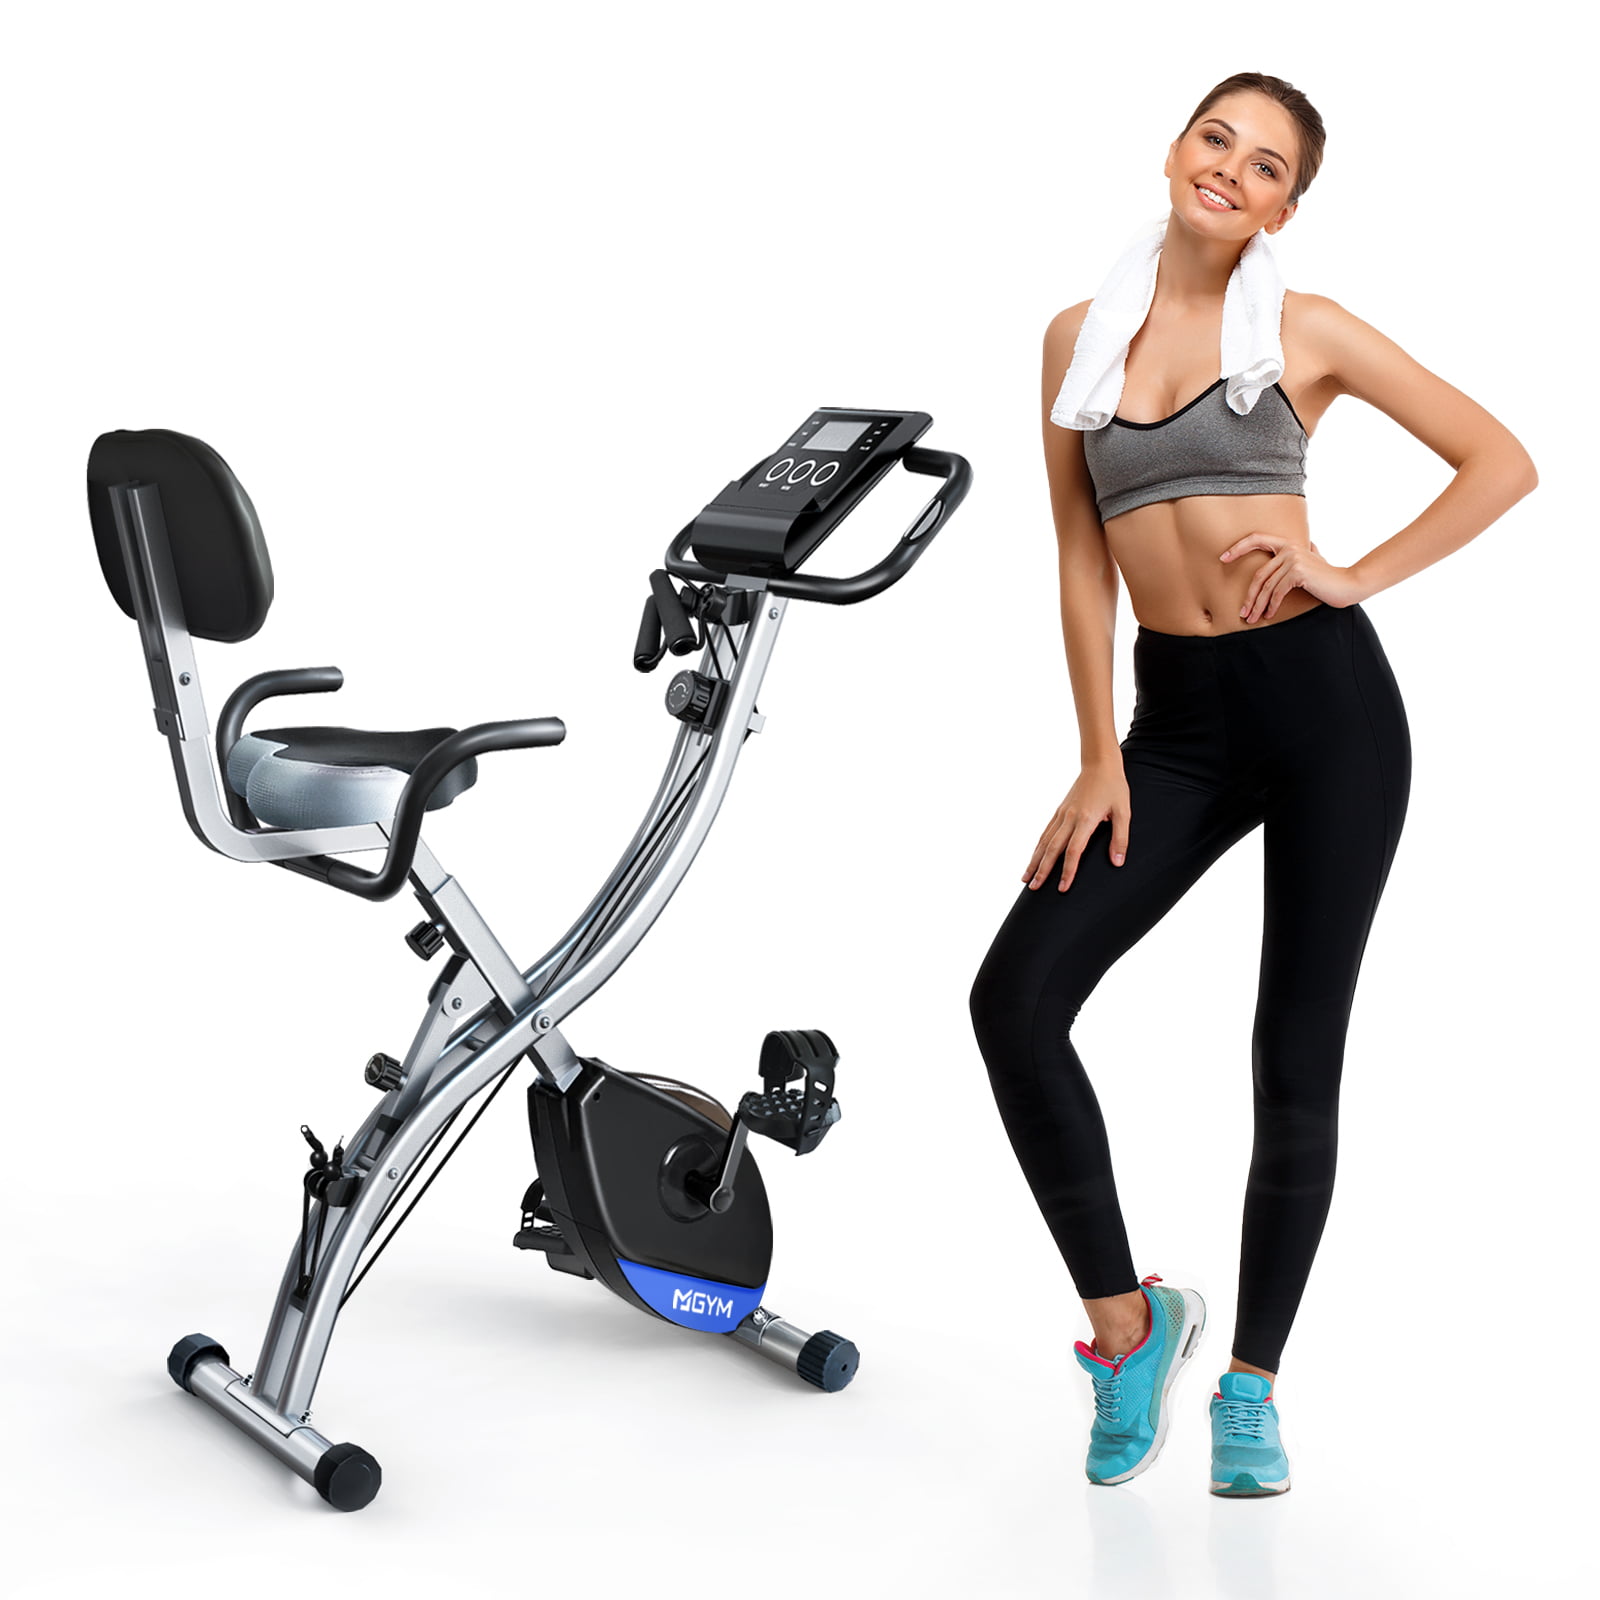 Folding Exercise Bike Cycle Pedal Arm Leg Resistance Home Gym Workout Exerciser 